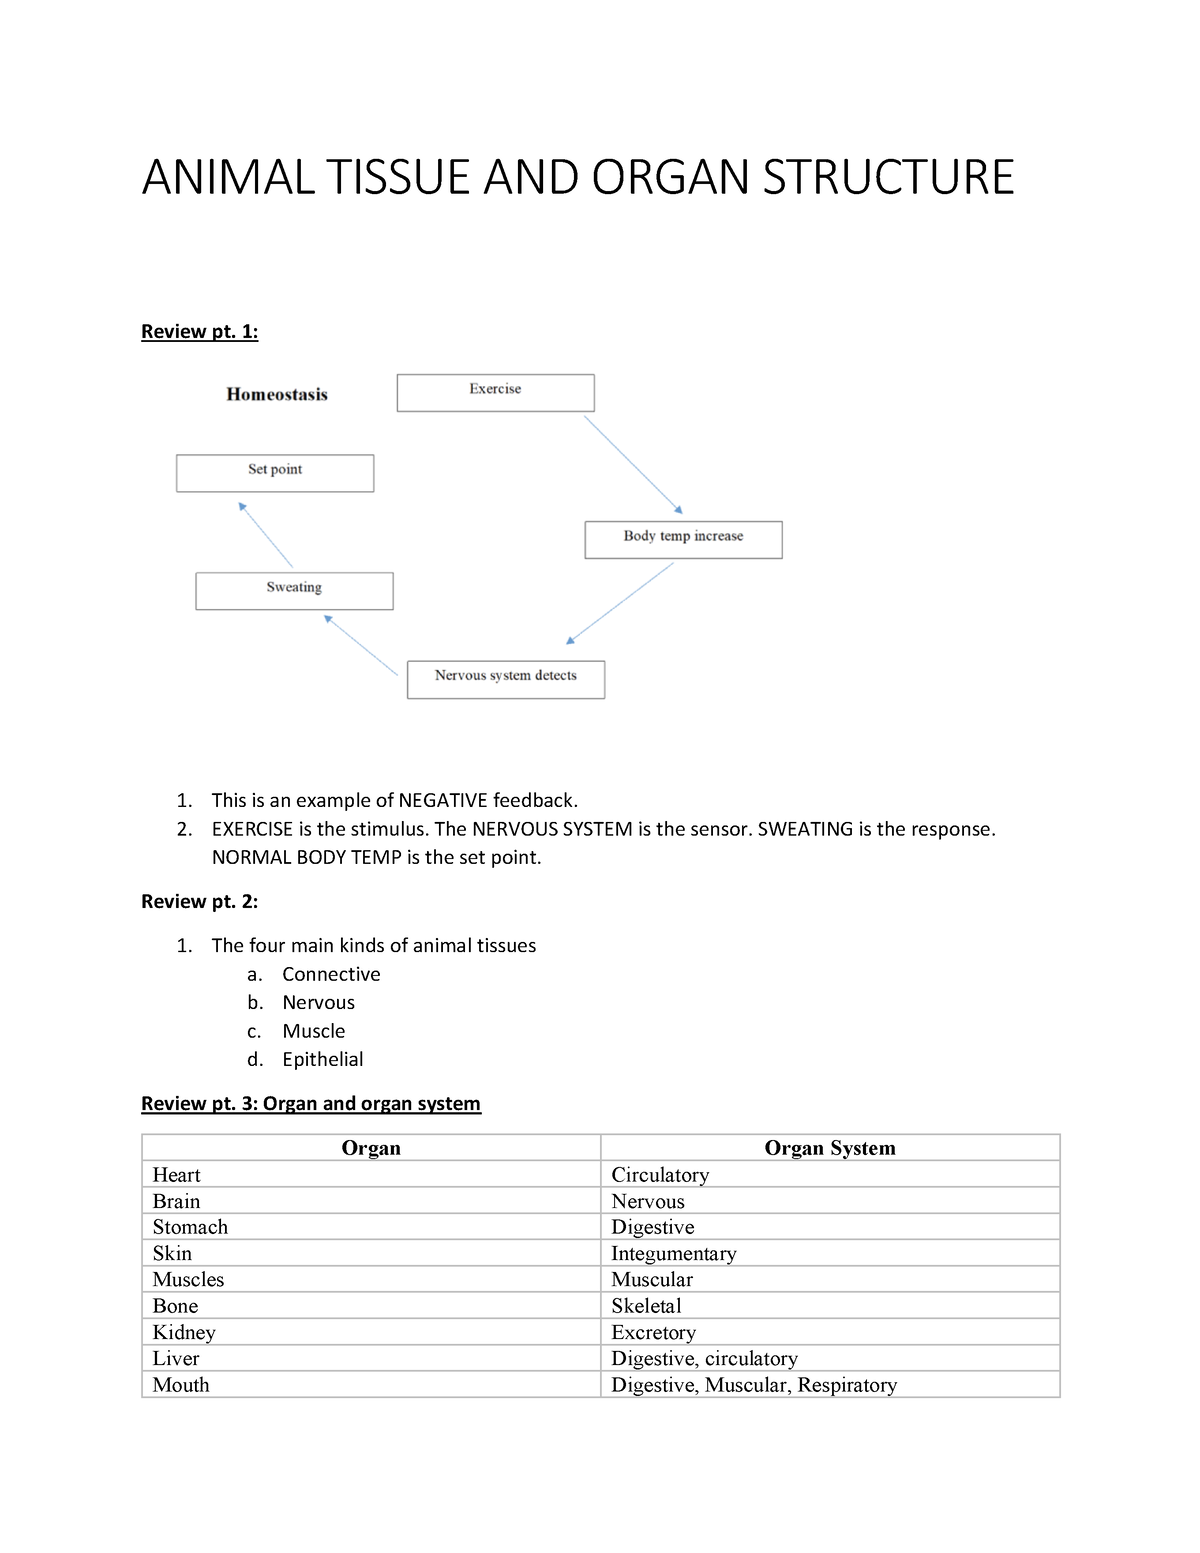 Animal Tissue AND Organ Structure - ANIMAL TISSUE AND ORGAN STRUCTURE  Review pt. 1: This is an - Studocu